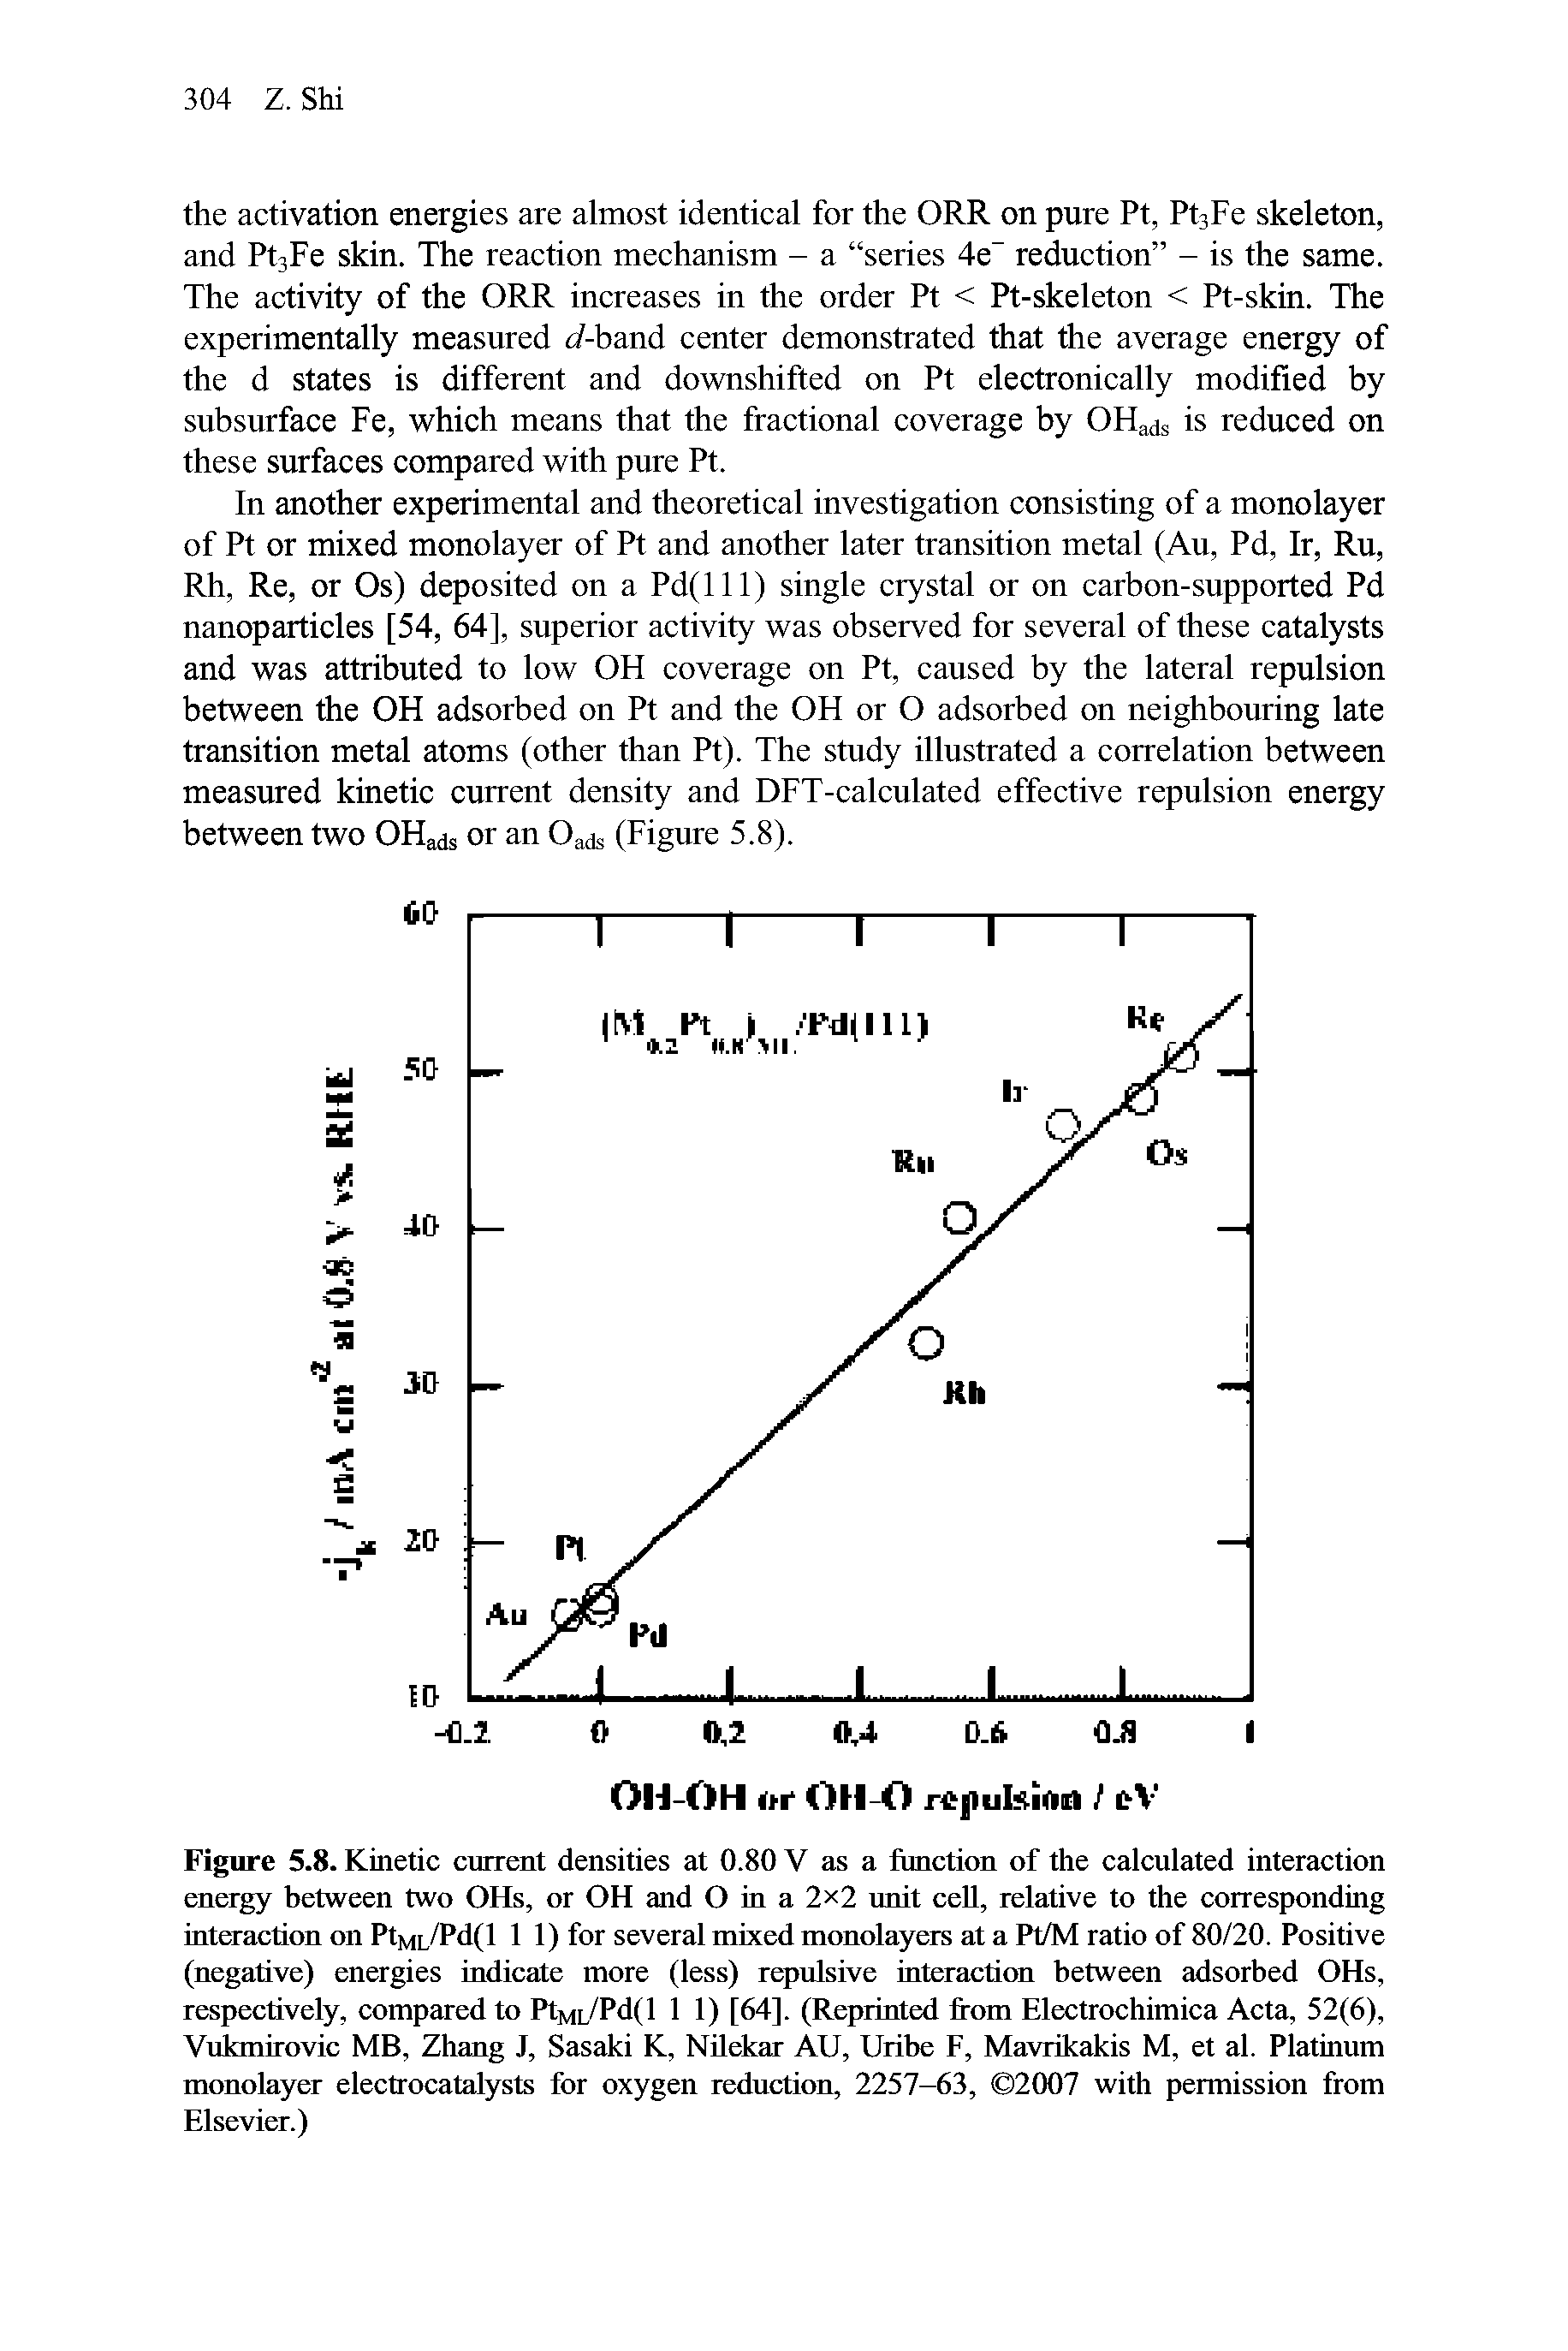 Figure 5.8. Kinetic current densities at 0.80 V as a function of the calculated interaction energy between two OHs, or OH and O in a 2x2 nnit cell, relative to the corresponding interaction on PtMLd d(l 1 1) for several mixed monolayers at a Pt/M ratio of 80/20. Positive (negative) energies indicate more (less) repnlsive interaction between adsorbed OHs, respectively, compared to PtML/Pd(l 1 1) [64]. (Reprinted from Electrochimica Acta, 52(6), Viikmirovic MB, Zhang J, Sasaki K, NUekar AU, Uribe F, Mavrikakis M, et al. Platinum monolayer electrocatalysts for oxygen rednction, 2257-63, 2007 with permission from Elsevier.)...